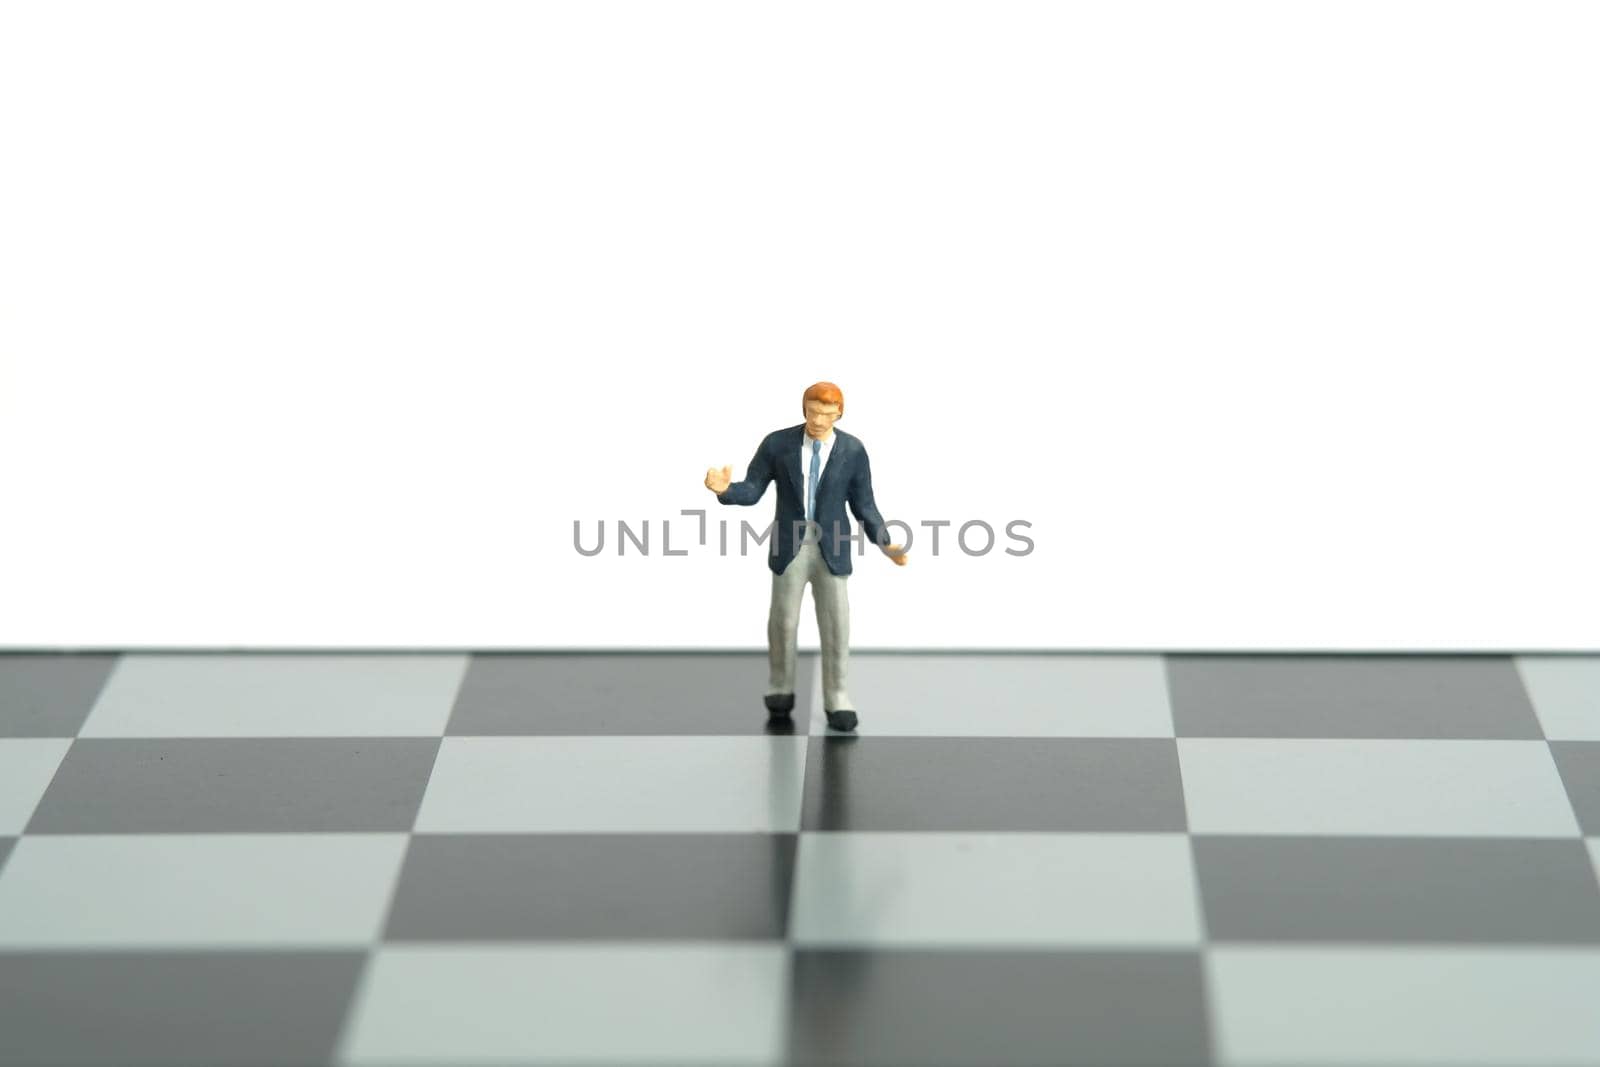 Miniature people toy figure photography. Strategy decision concept. A shrugging unsure businessman stand above chessboard. Isolated on white background. Image photo